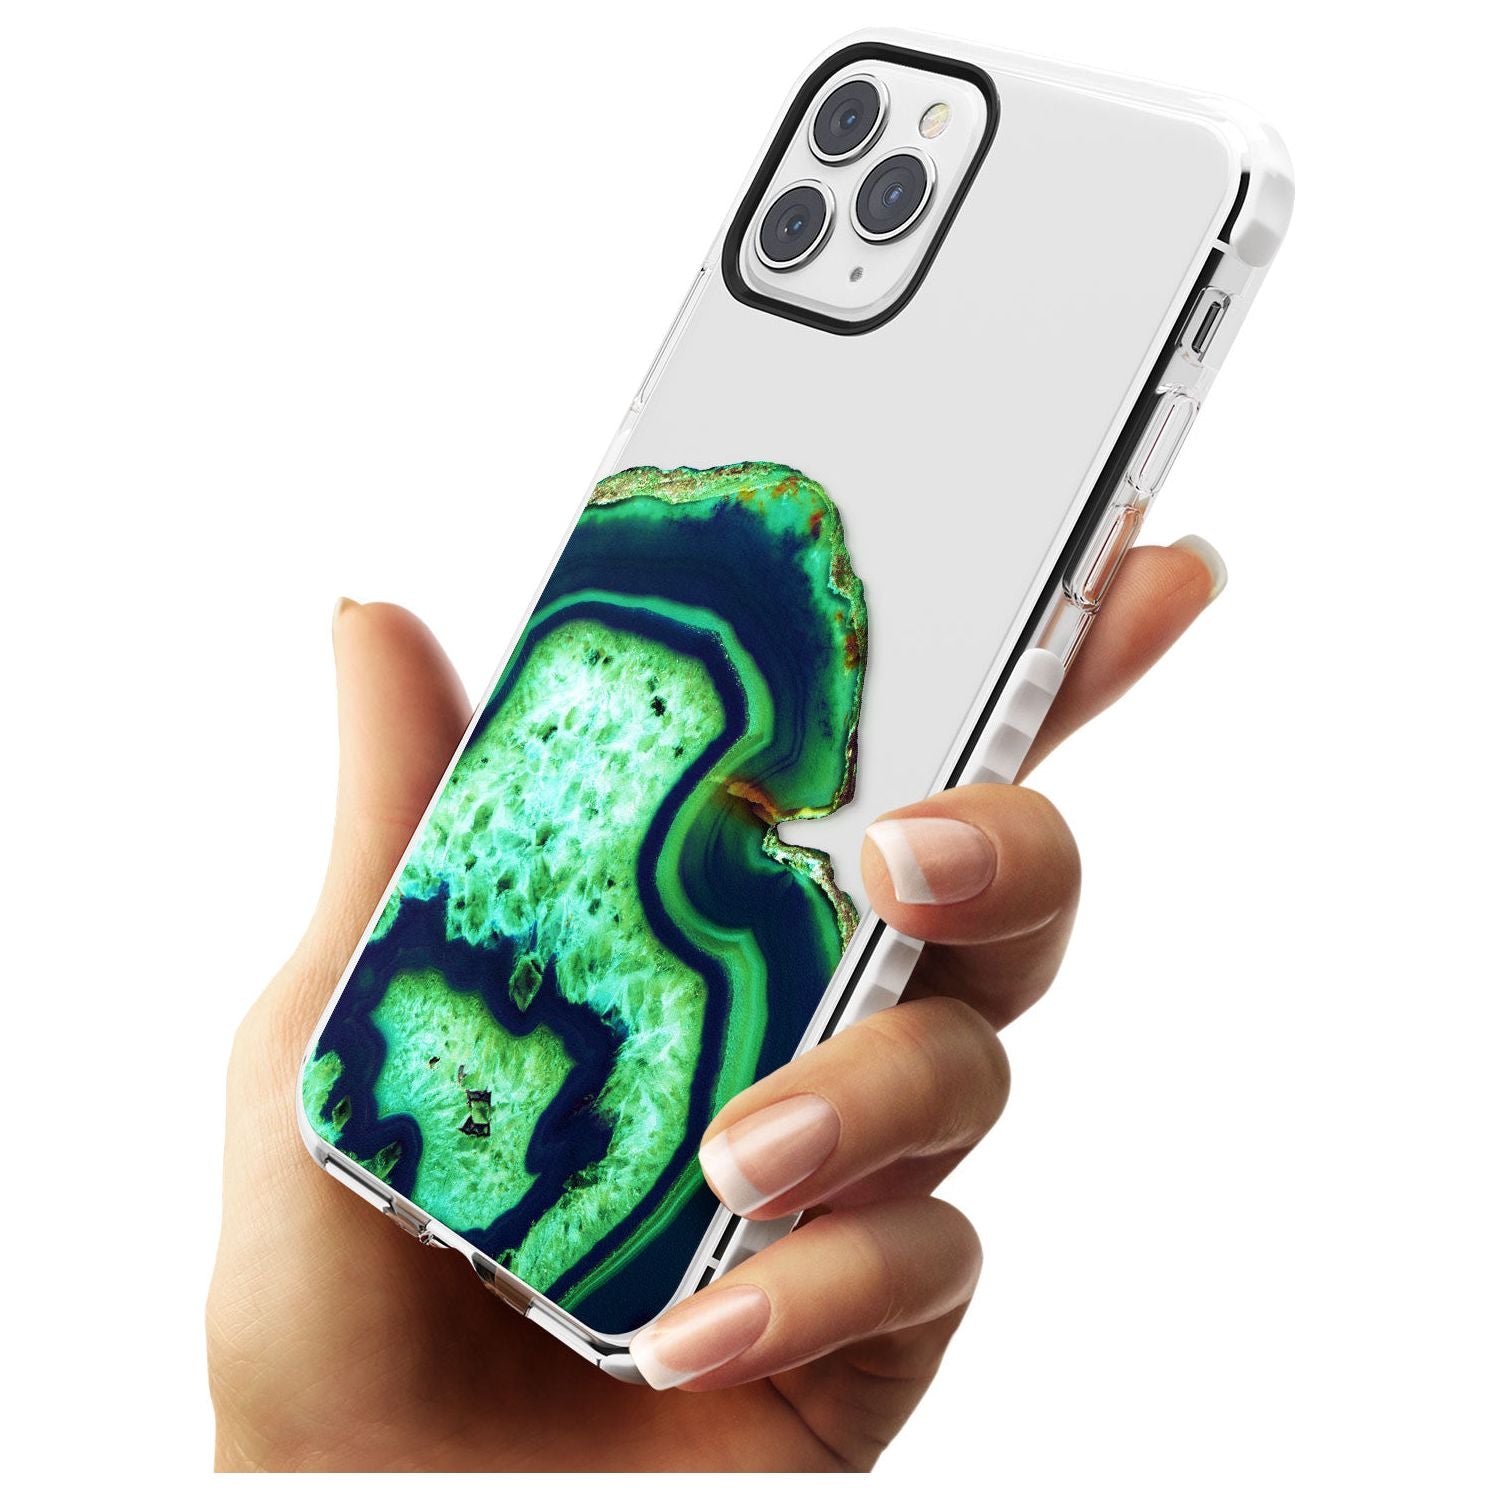 Neon Green & Blue Agate Crystal Transparent Design Impact Phone Case for iPhone 11 Pro Max